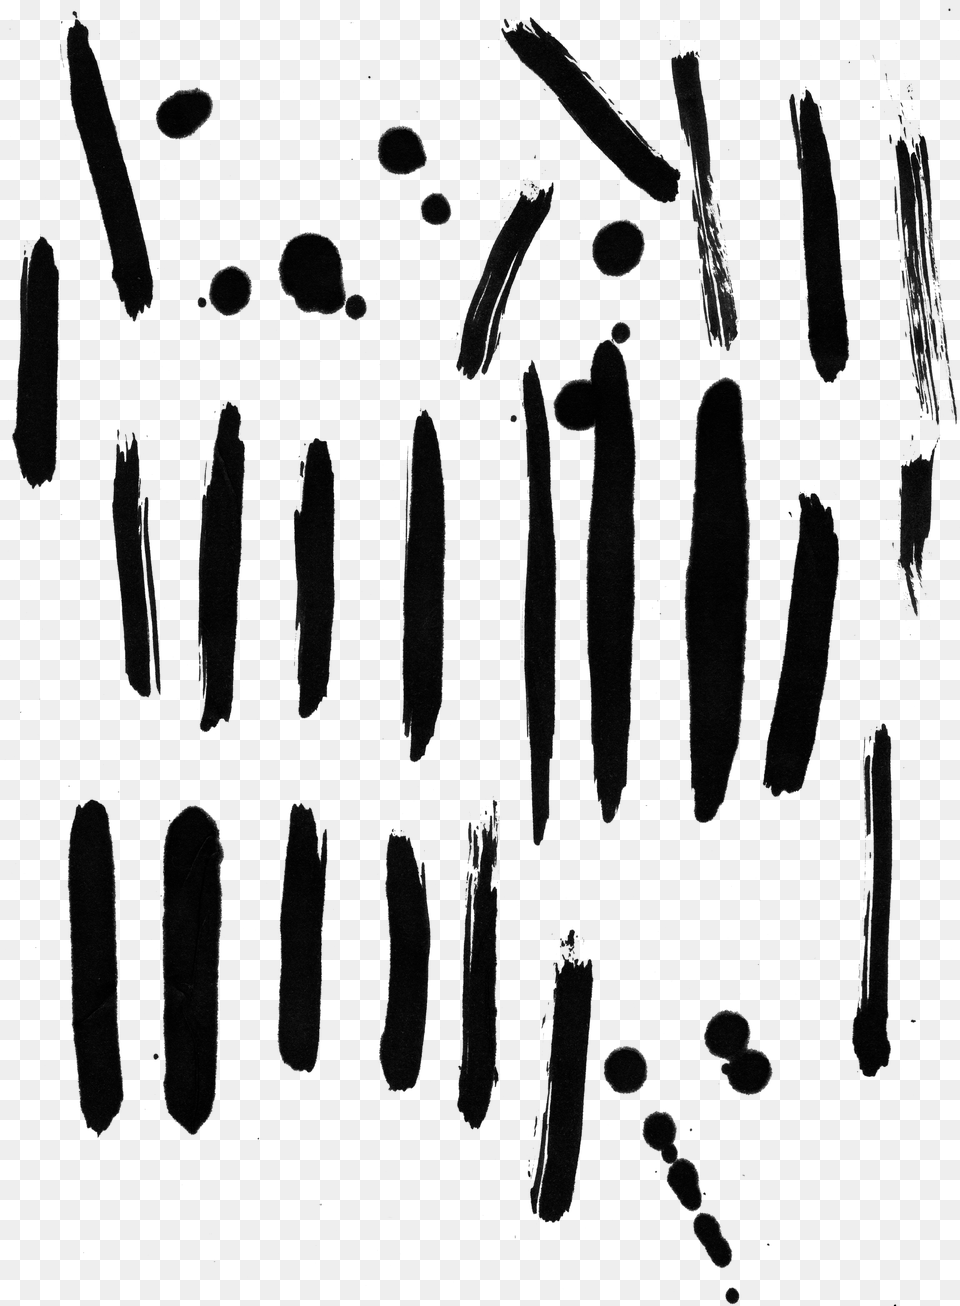 Brush Strokes Ink Blots Free Transparent Image Cool Video Intro Png